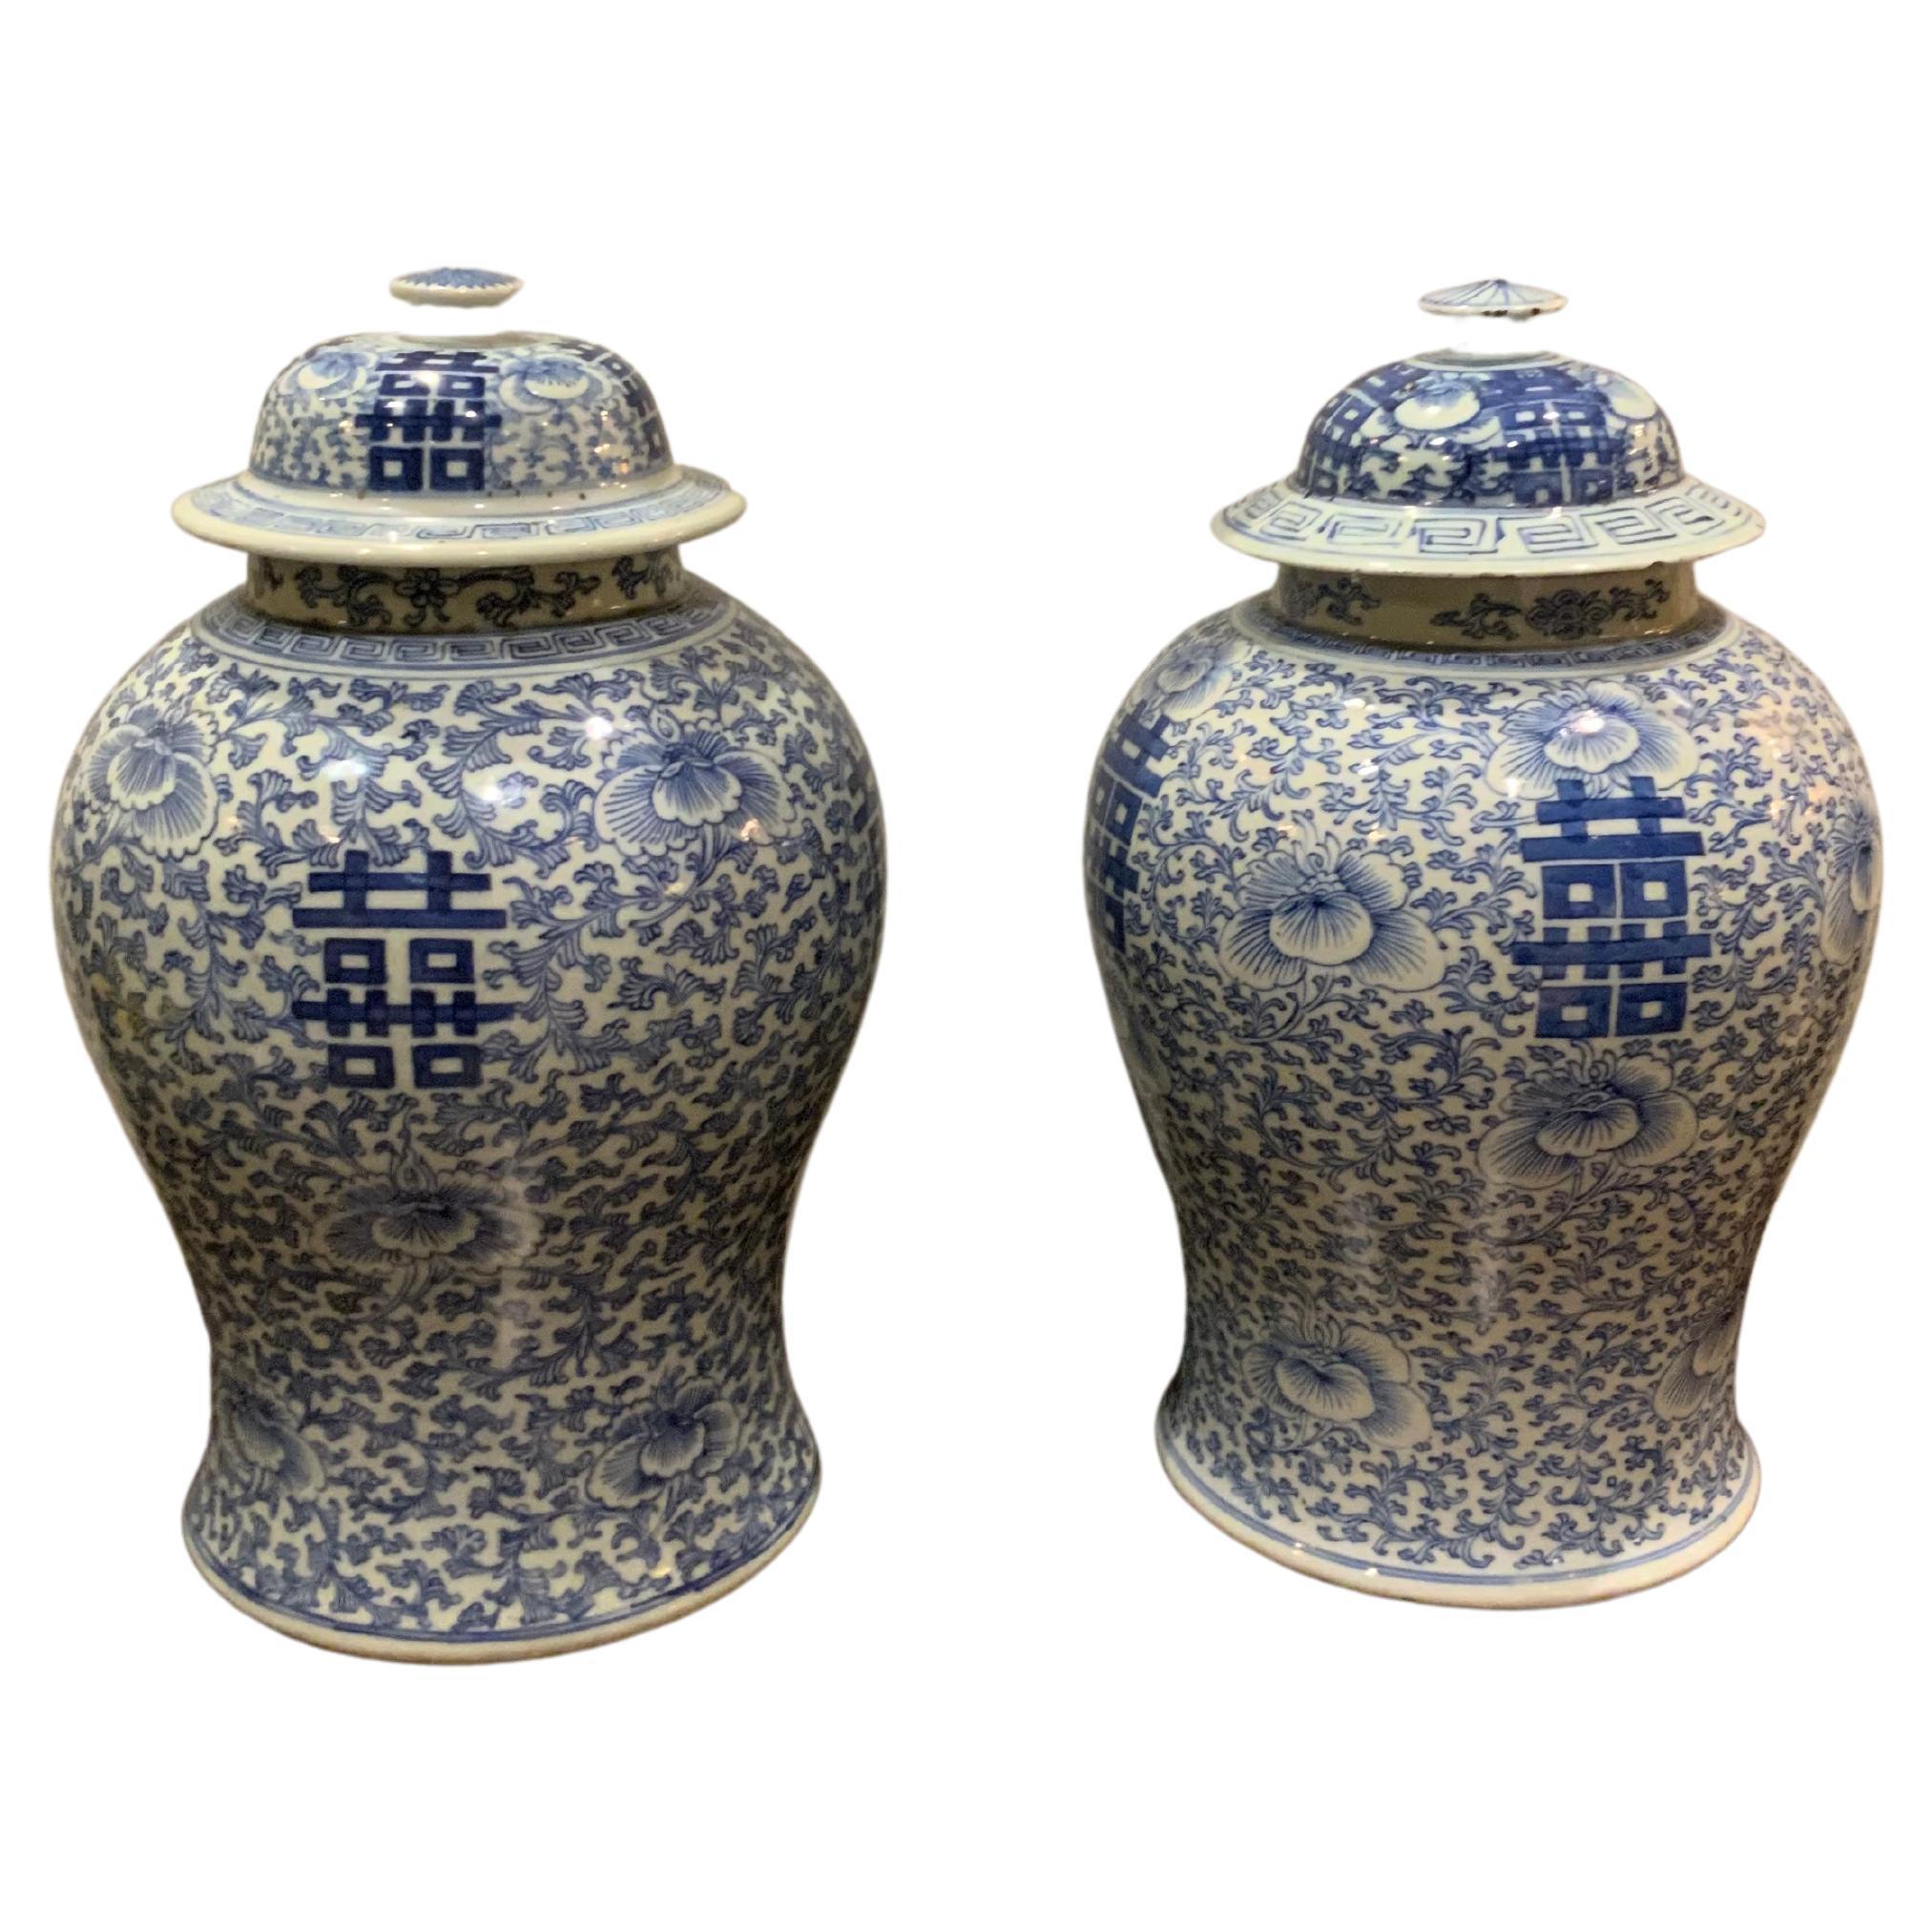 Pair of Antique Chinese Blue/White Temple Jars from Ching Wang Shu XIX Dynasty 